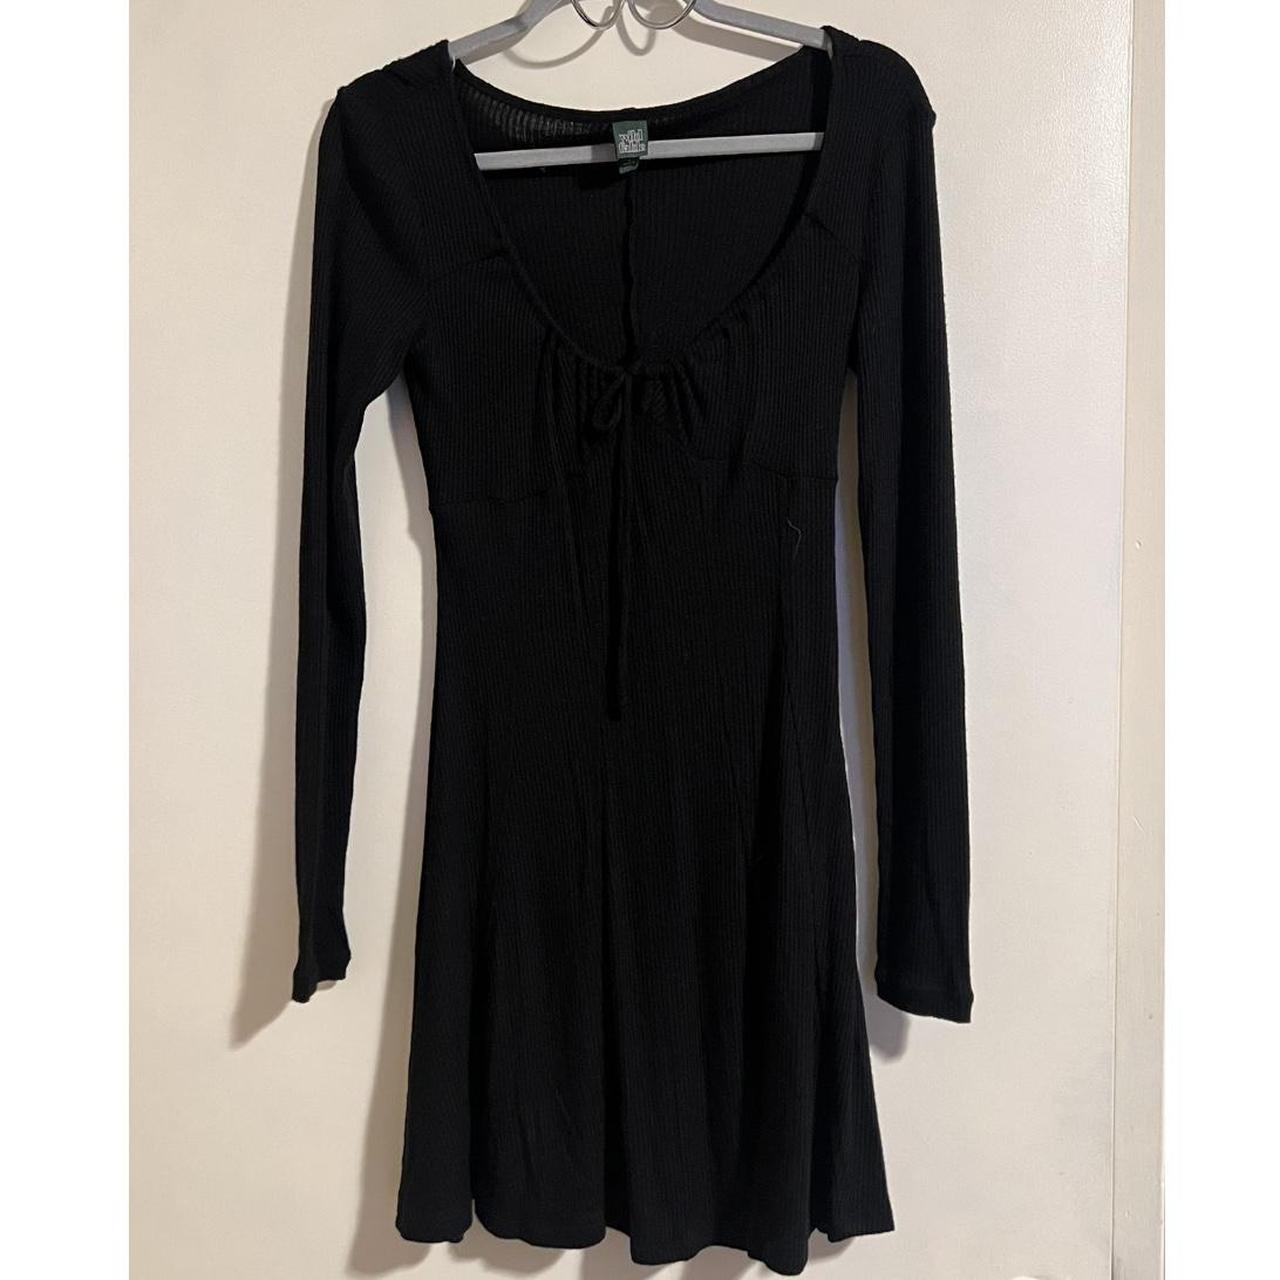 Black flare dress | worn once but couldn’t find any... - Depop